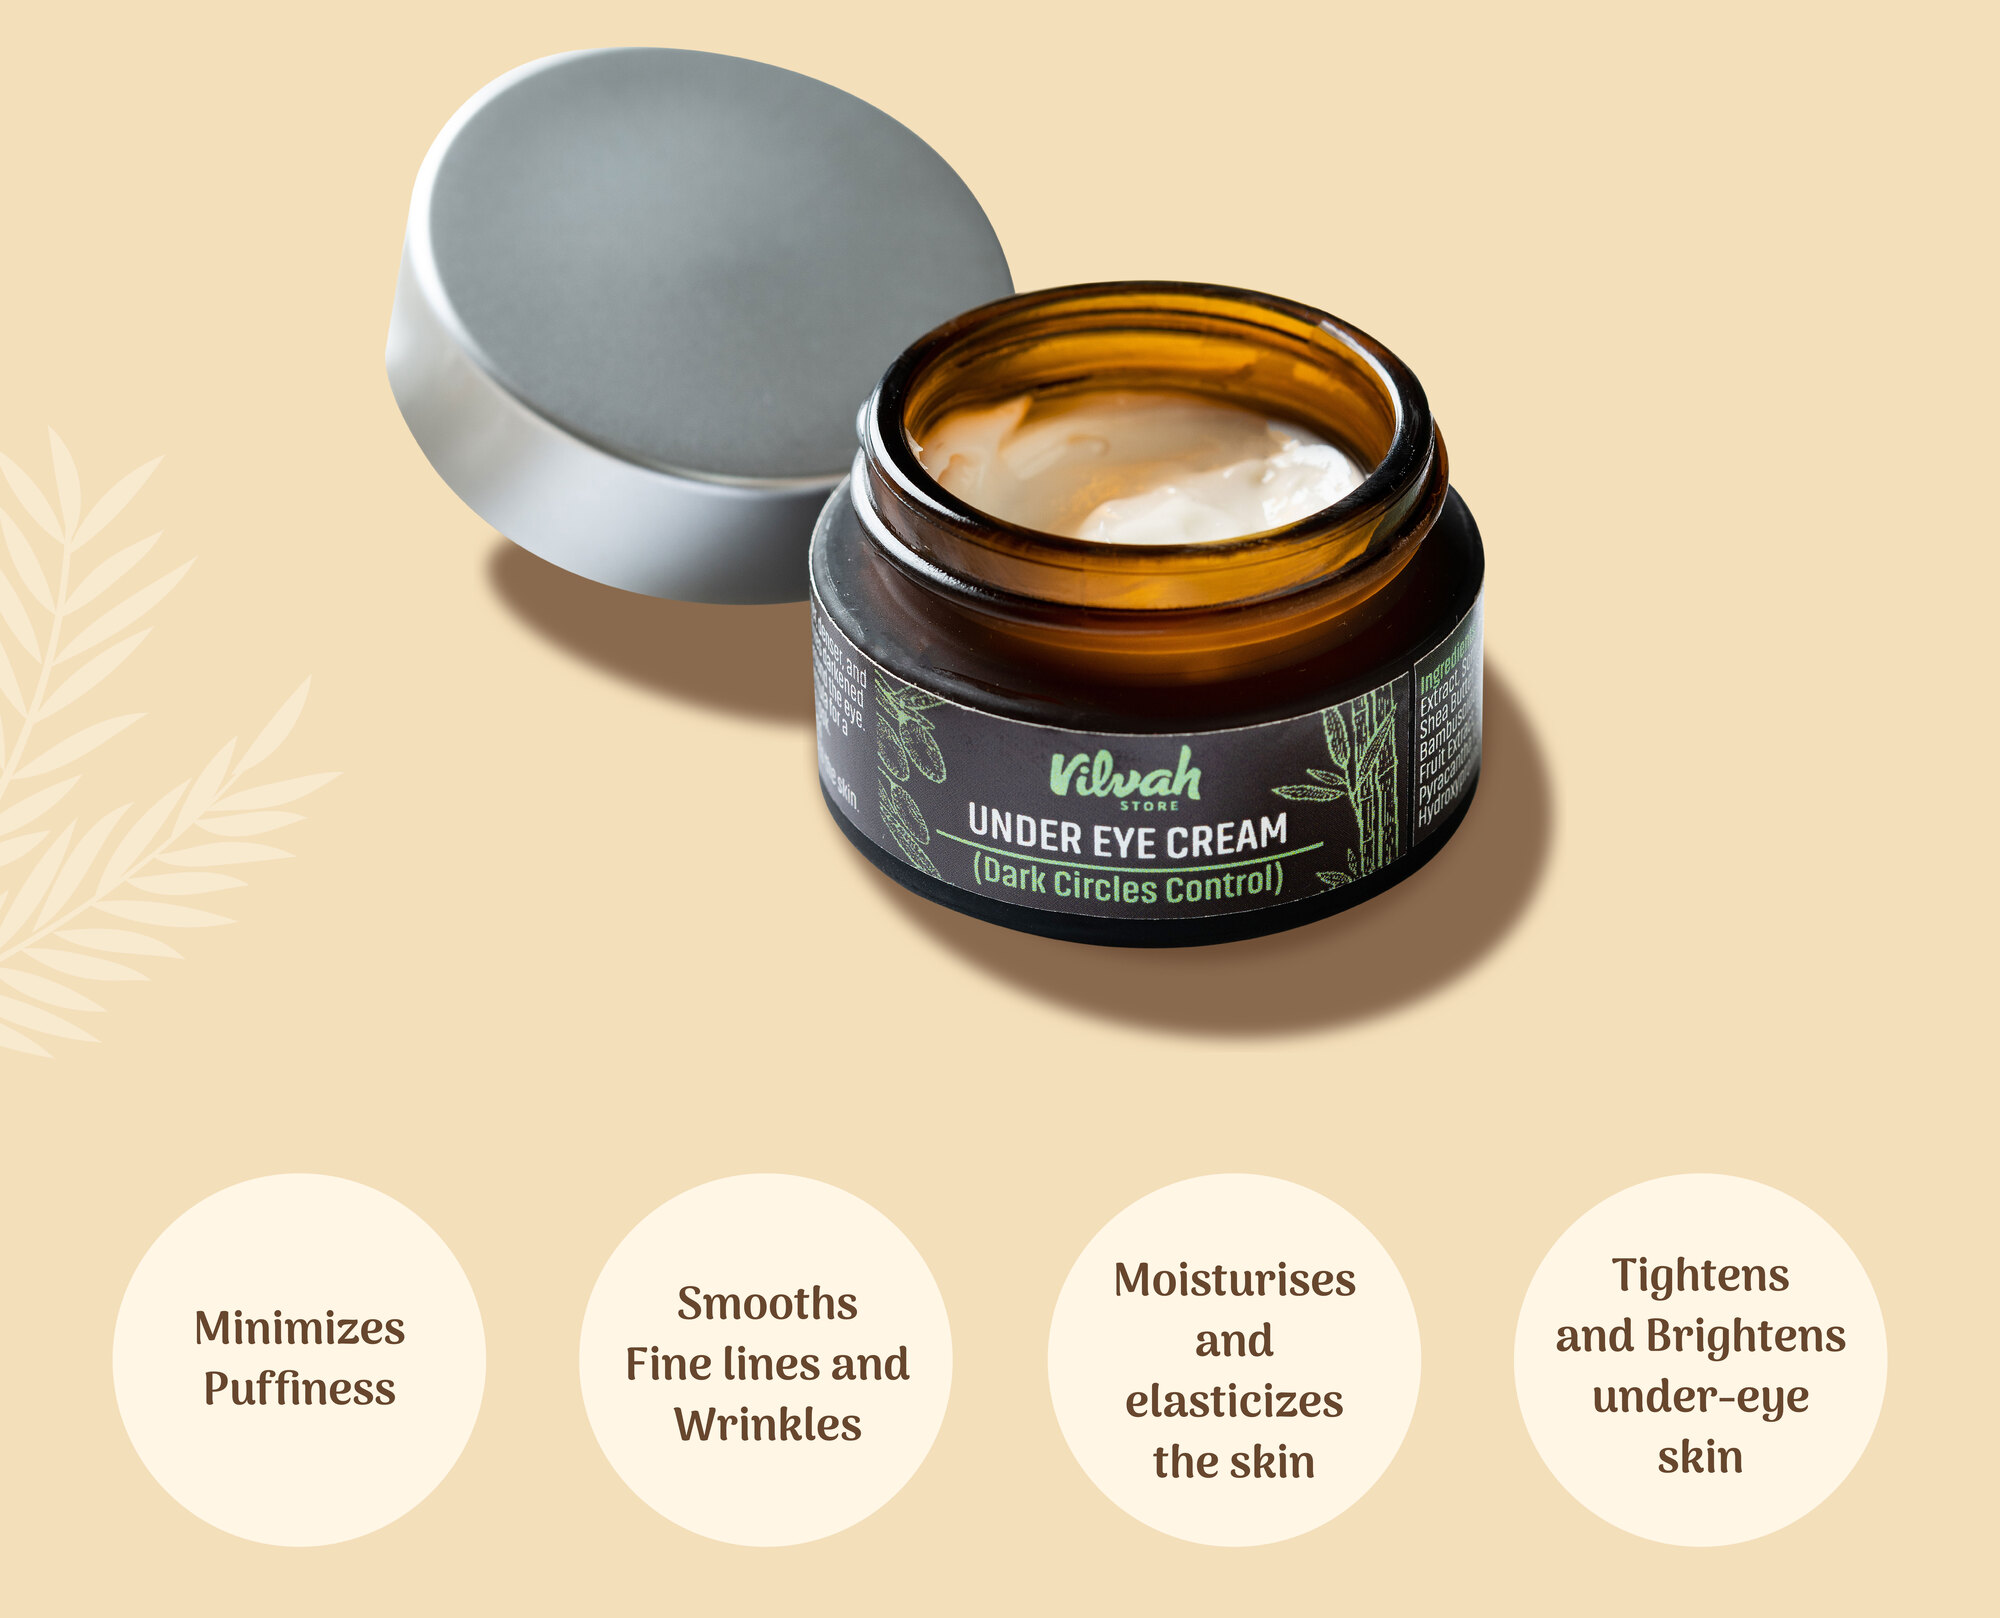 Minimizes Puffiness Smooths Fine lines and Wrinkles if DER EVE CREAM Moisturises Tightens and and Brightens elasticizes under-eye the skin skin 